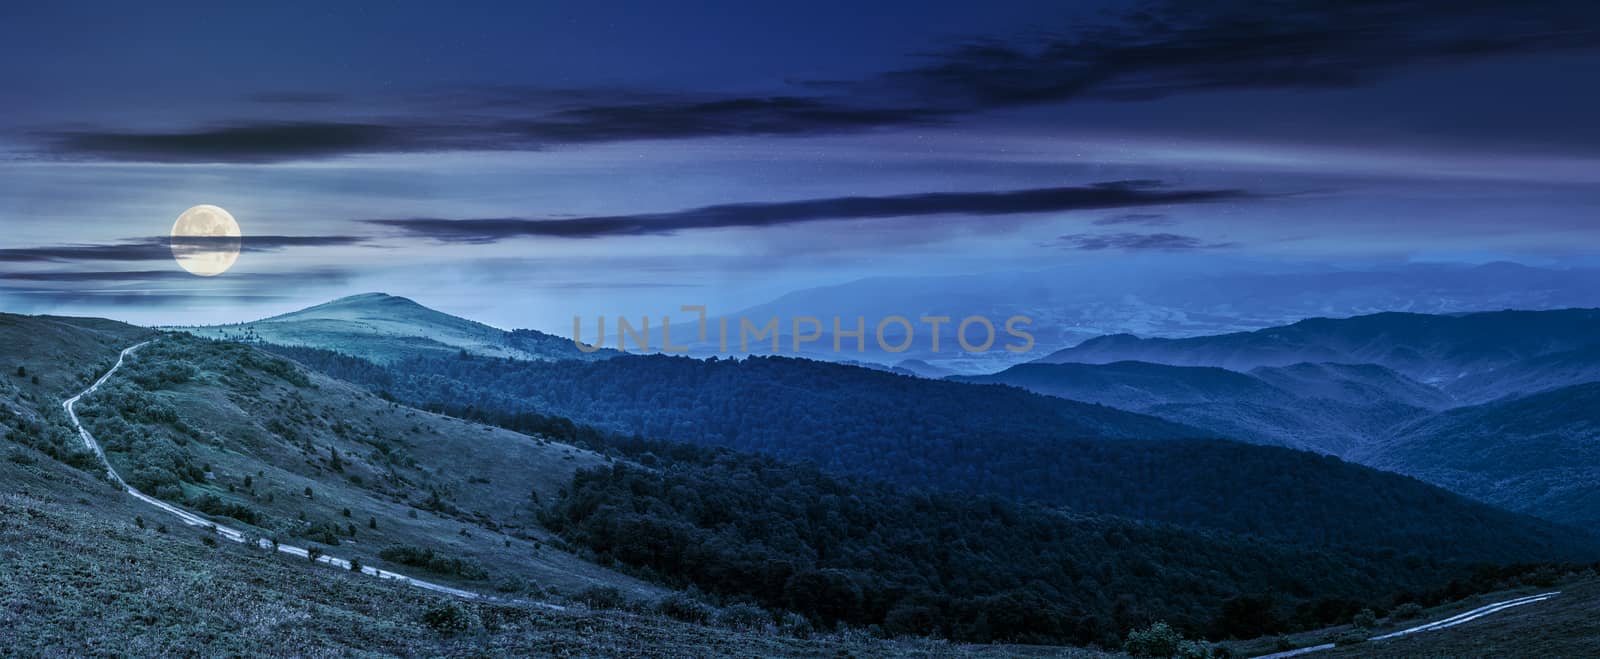 hillside panorama in mountains at night by Pellinni